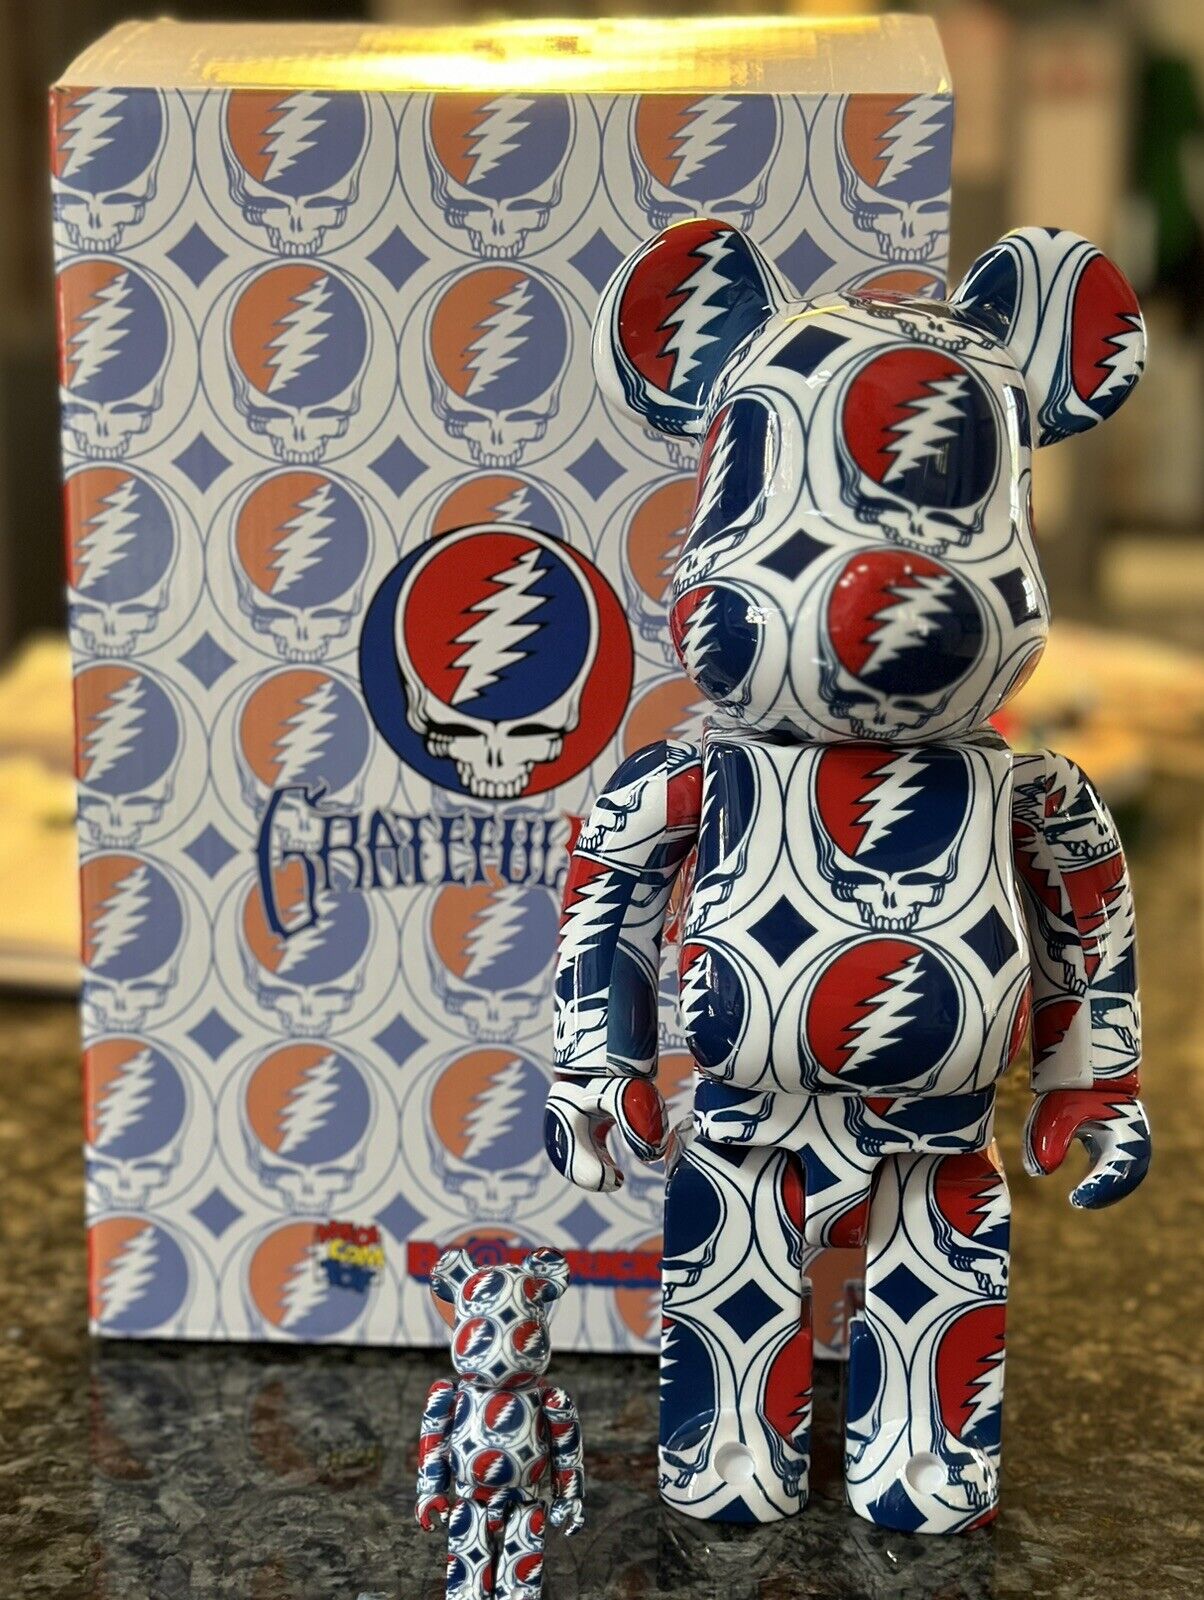 Grateful Dead - Steal Your Face 100% & 400% Bearbrick Set. Opened Box.